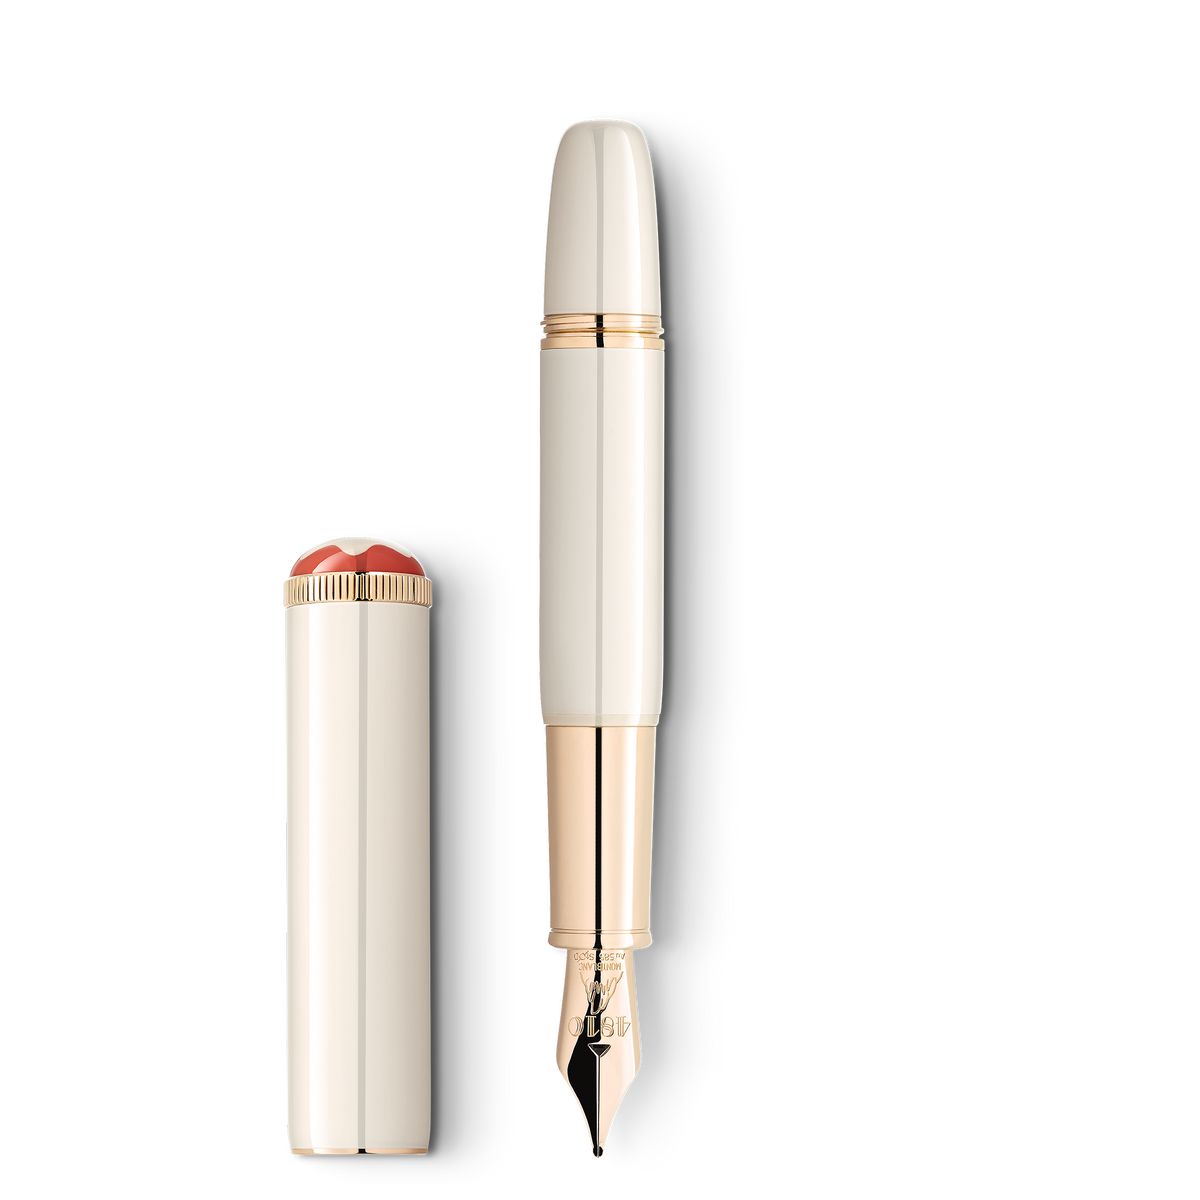 Montblanc Heritage Rouge et Noir "Baby" Special Edition Ivory-colored Fountain Pen